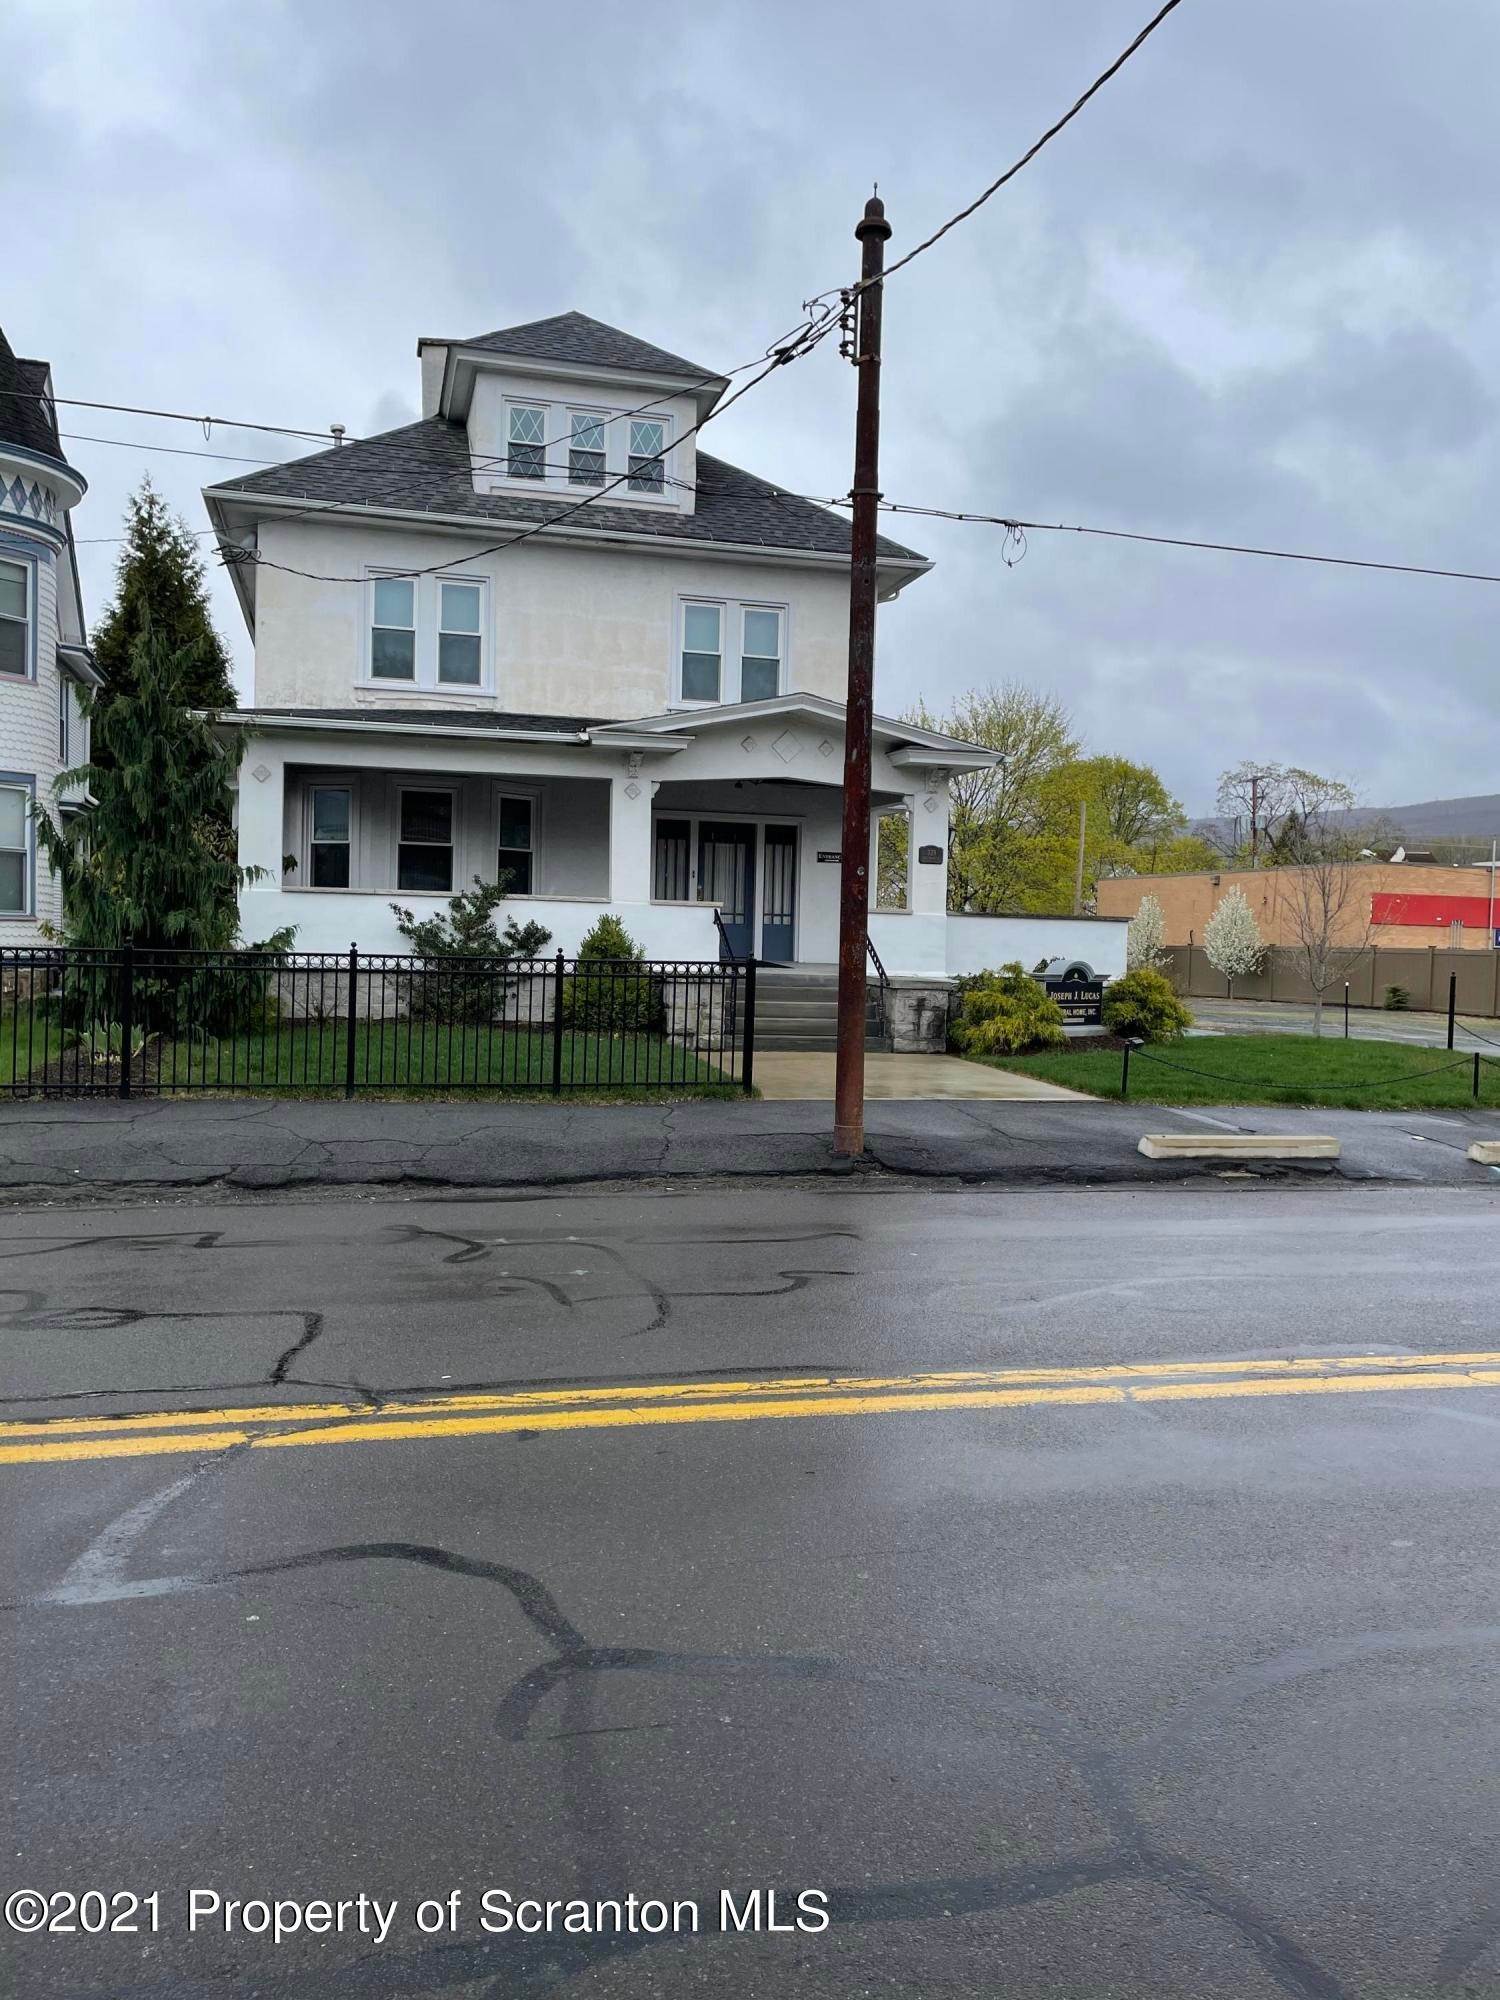 2. Commercial for Sale at 329 Market St Scranton, Pennsylvania 18508 United States